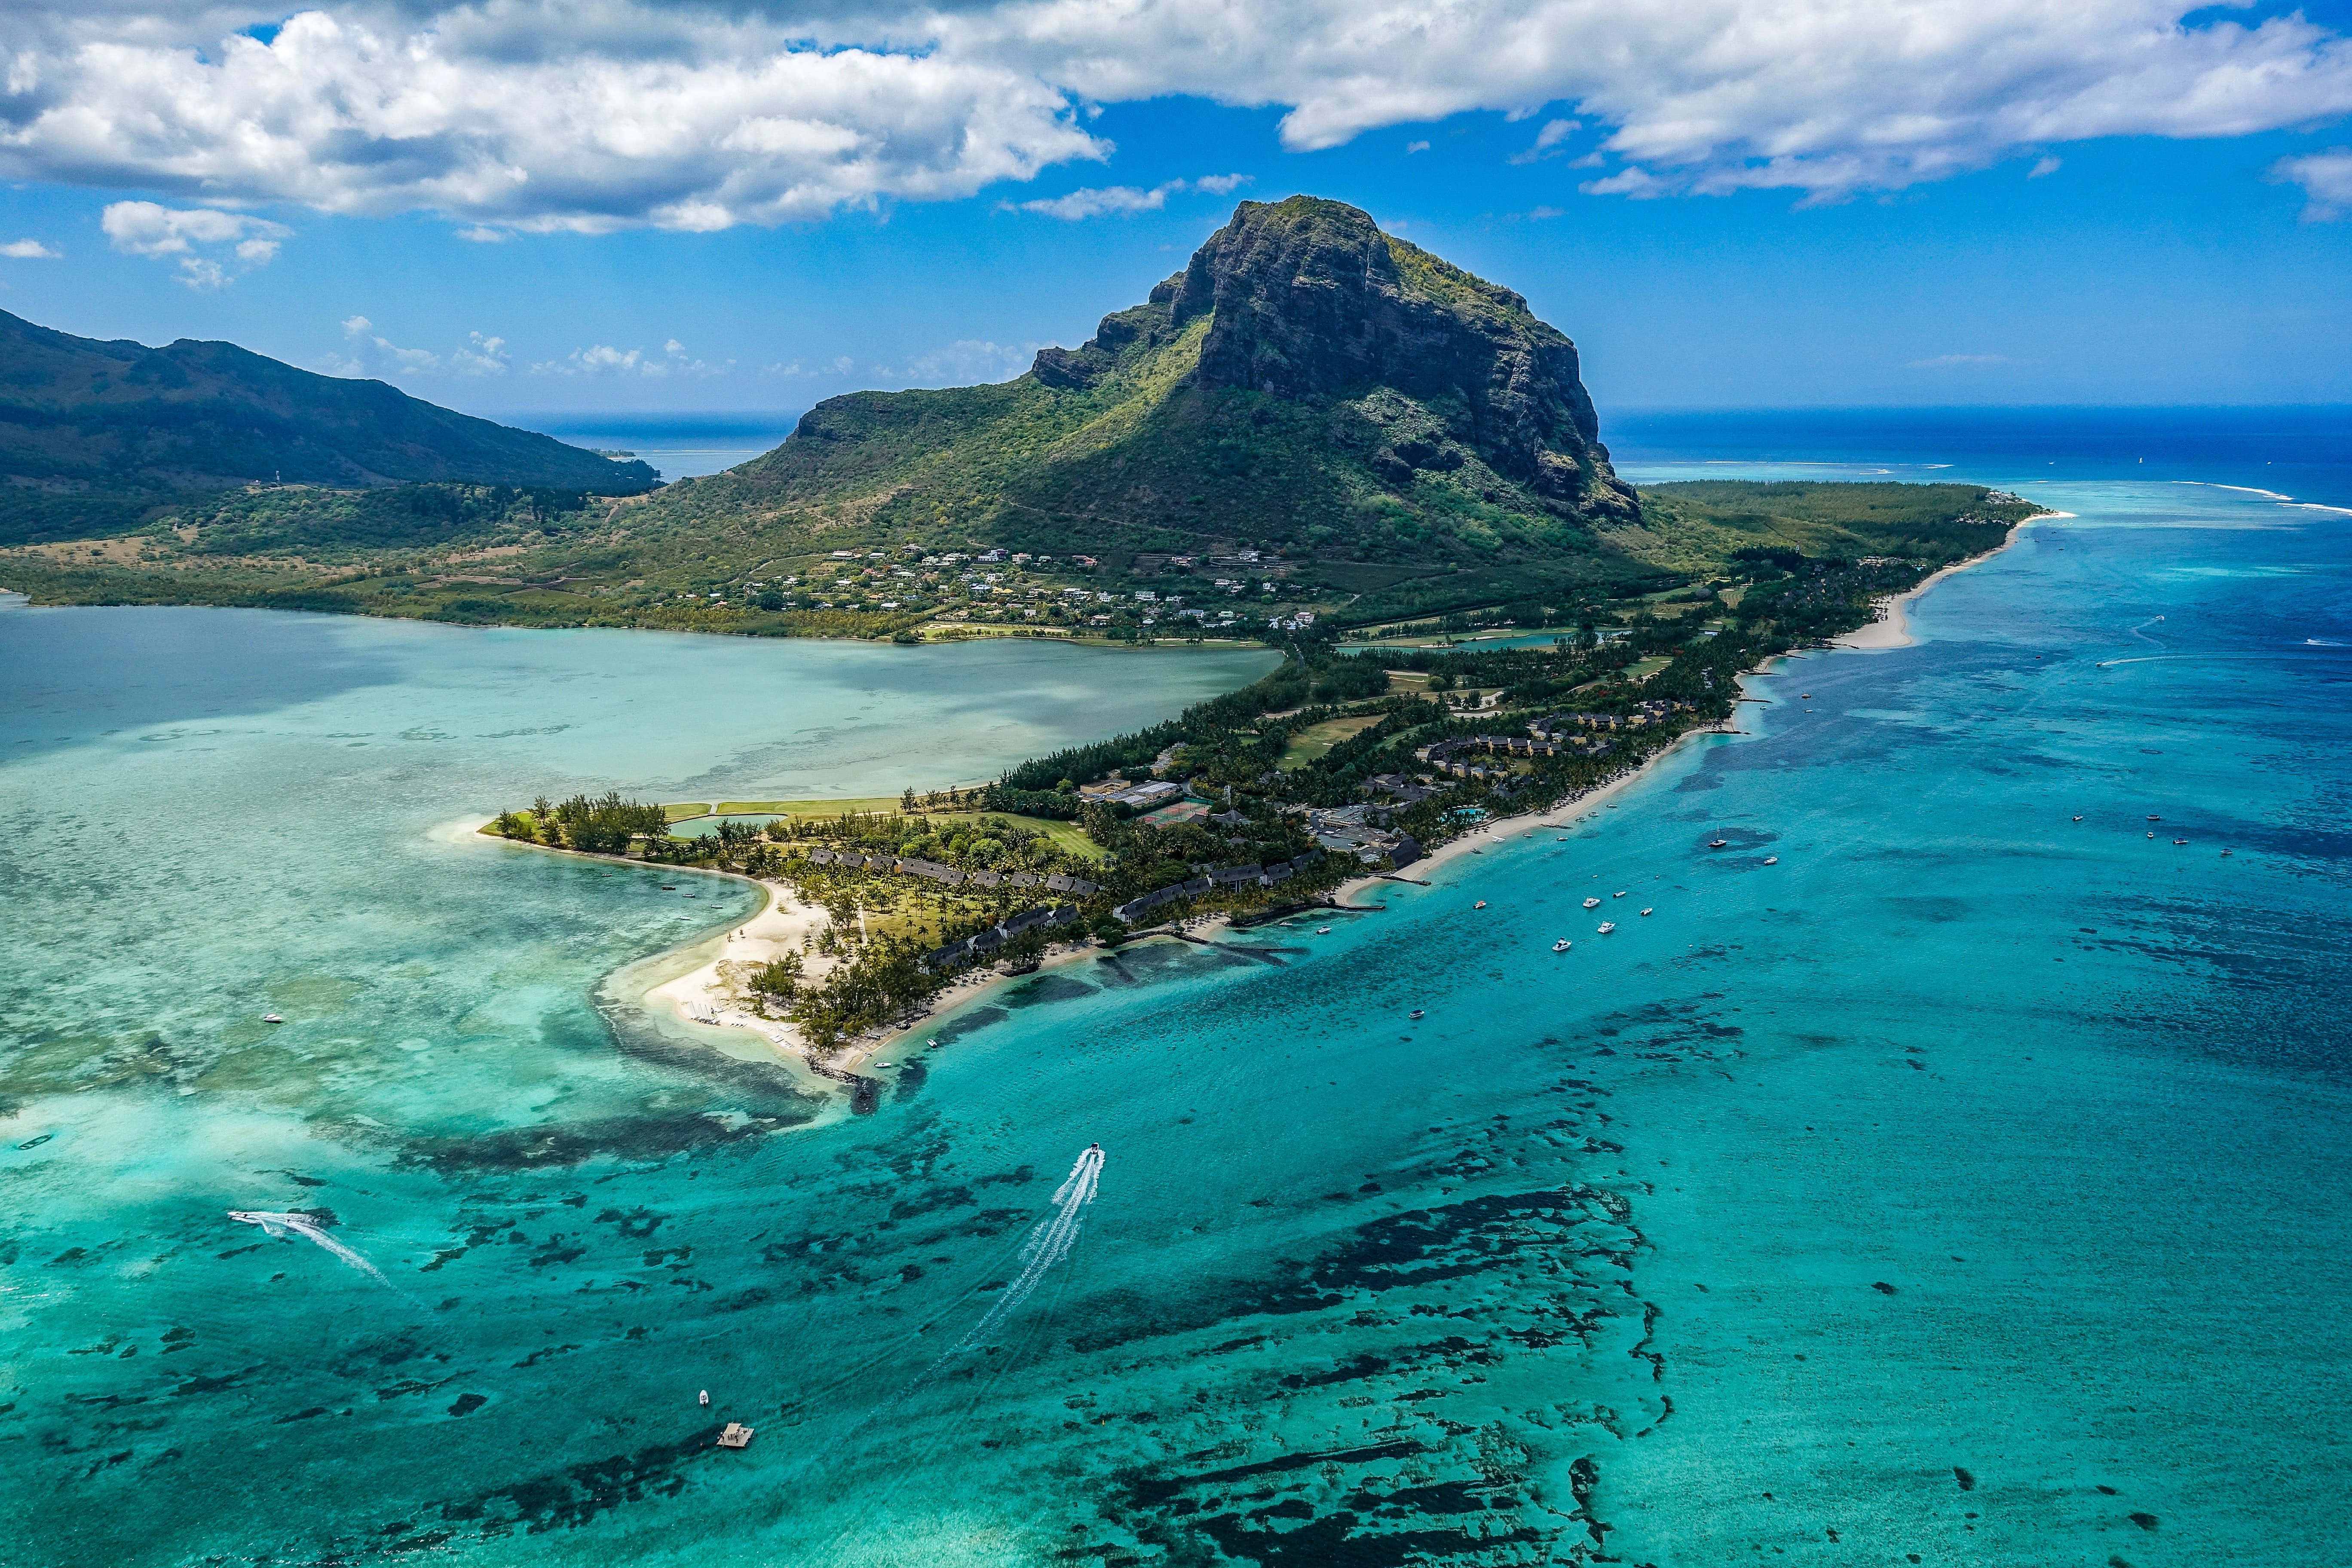 Mauritius is a covid alternative with crystal blue waters and green mountains.